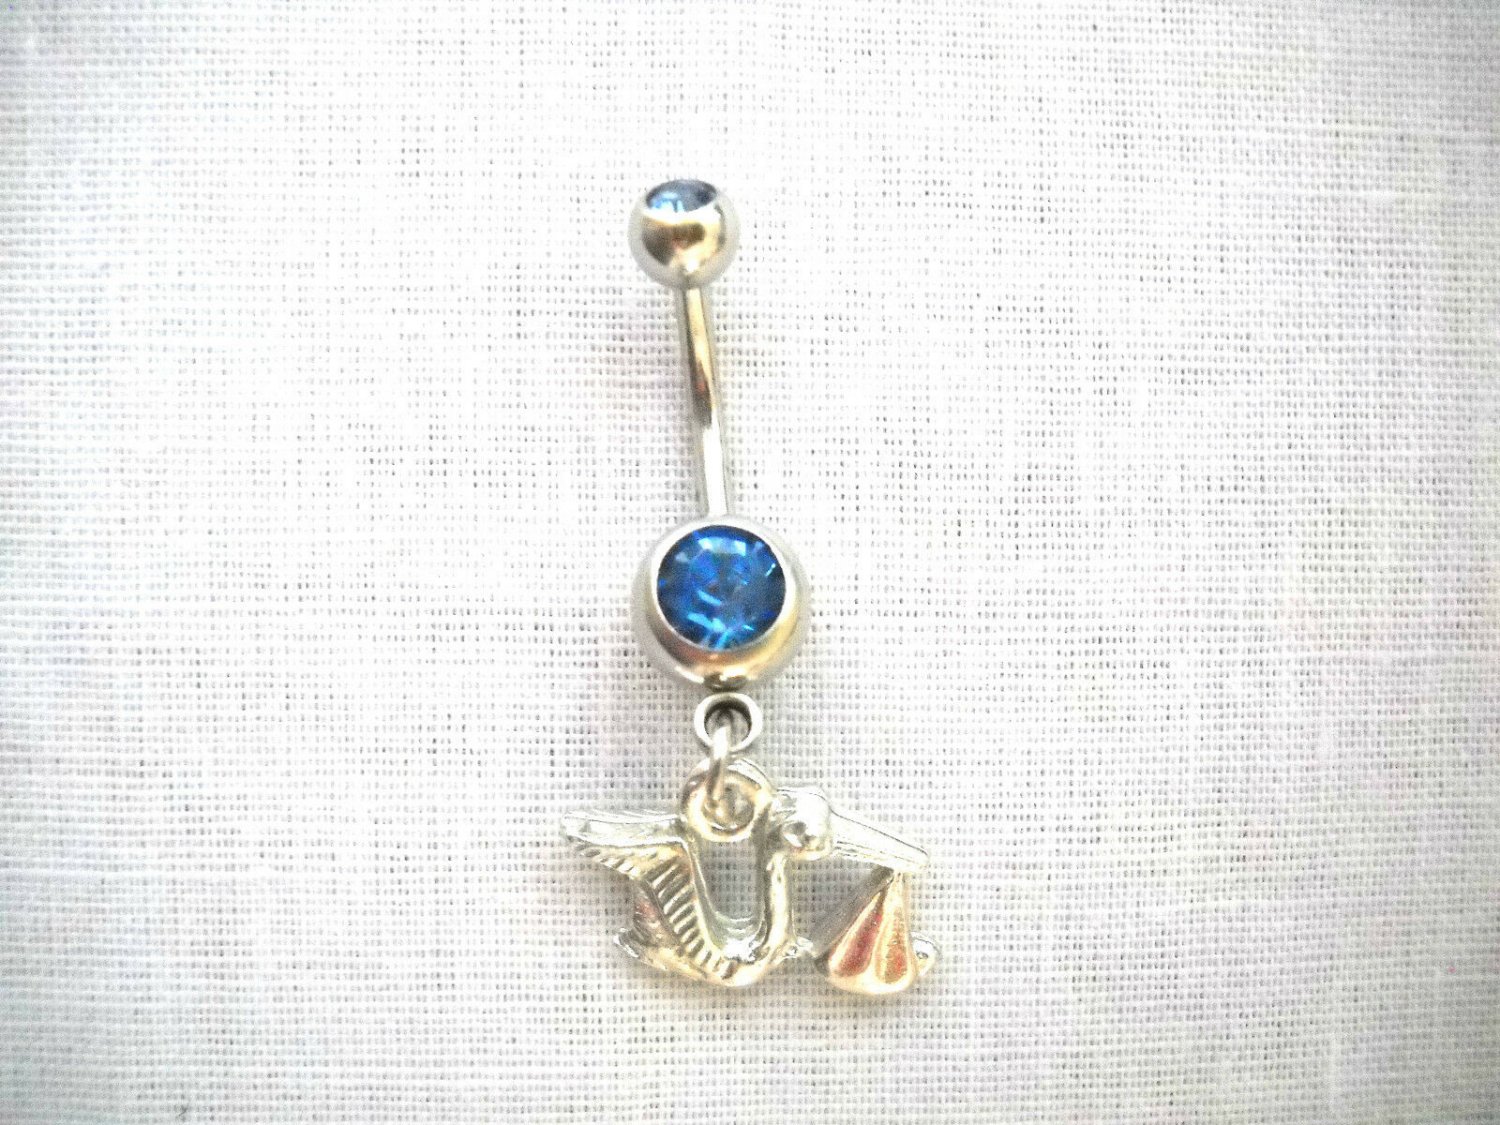 DELIVERY FLYING STORK w BABY IT'S A BOY CHARM ON 14g DBL BLUE CZ BELLY RING BAR